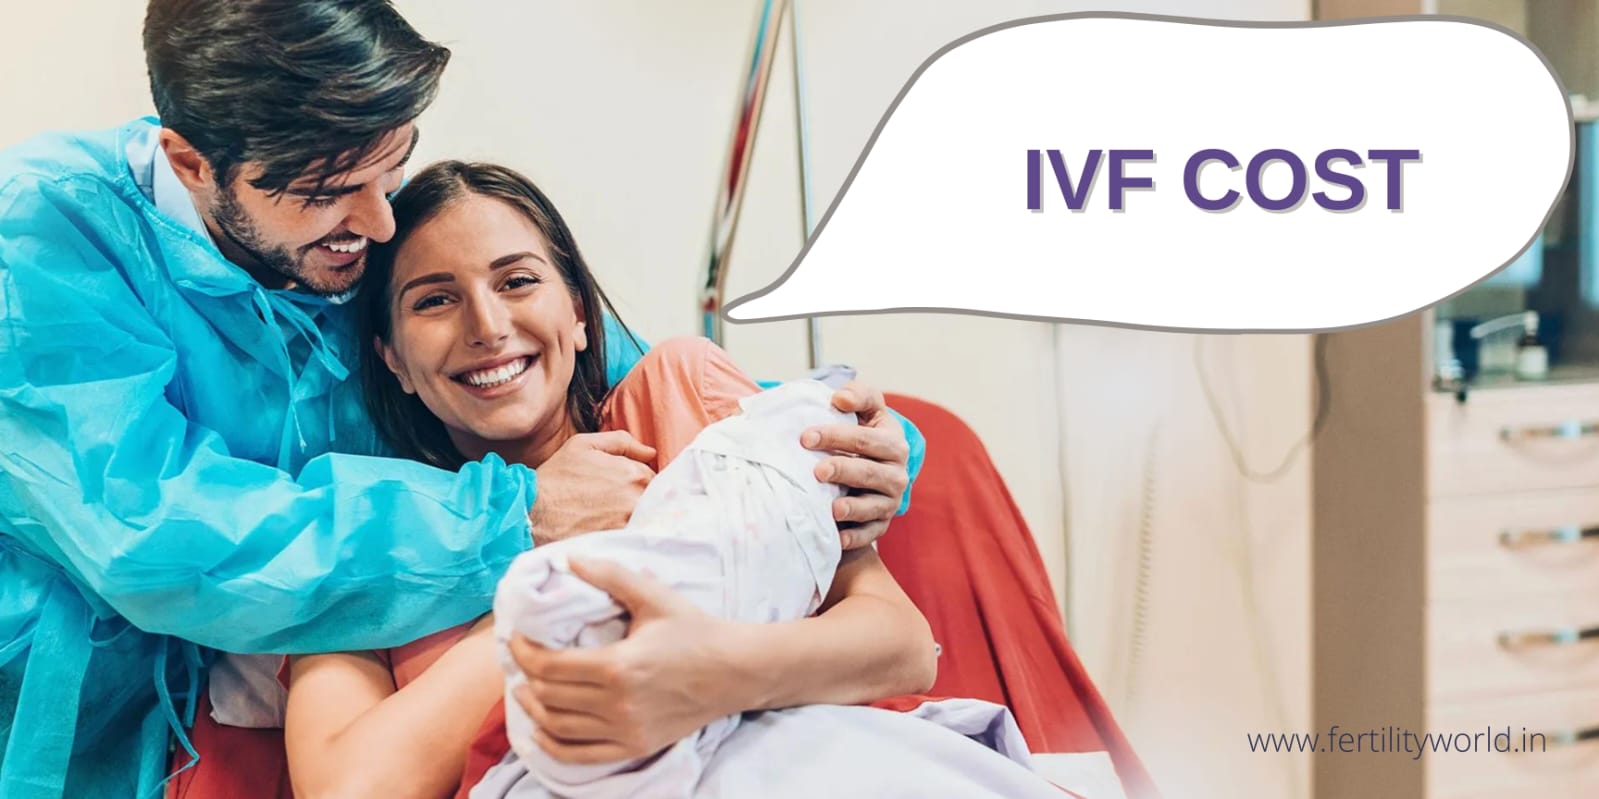 How much does IVF treatment cost in Dubai?